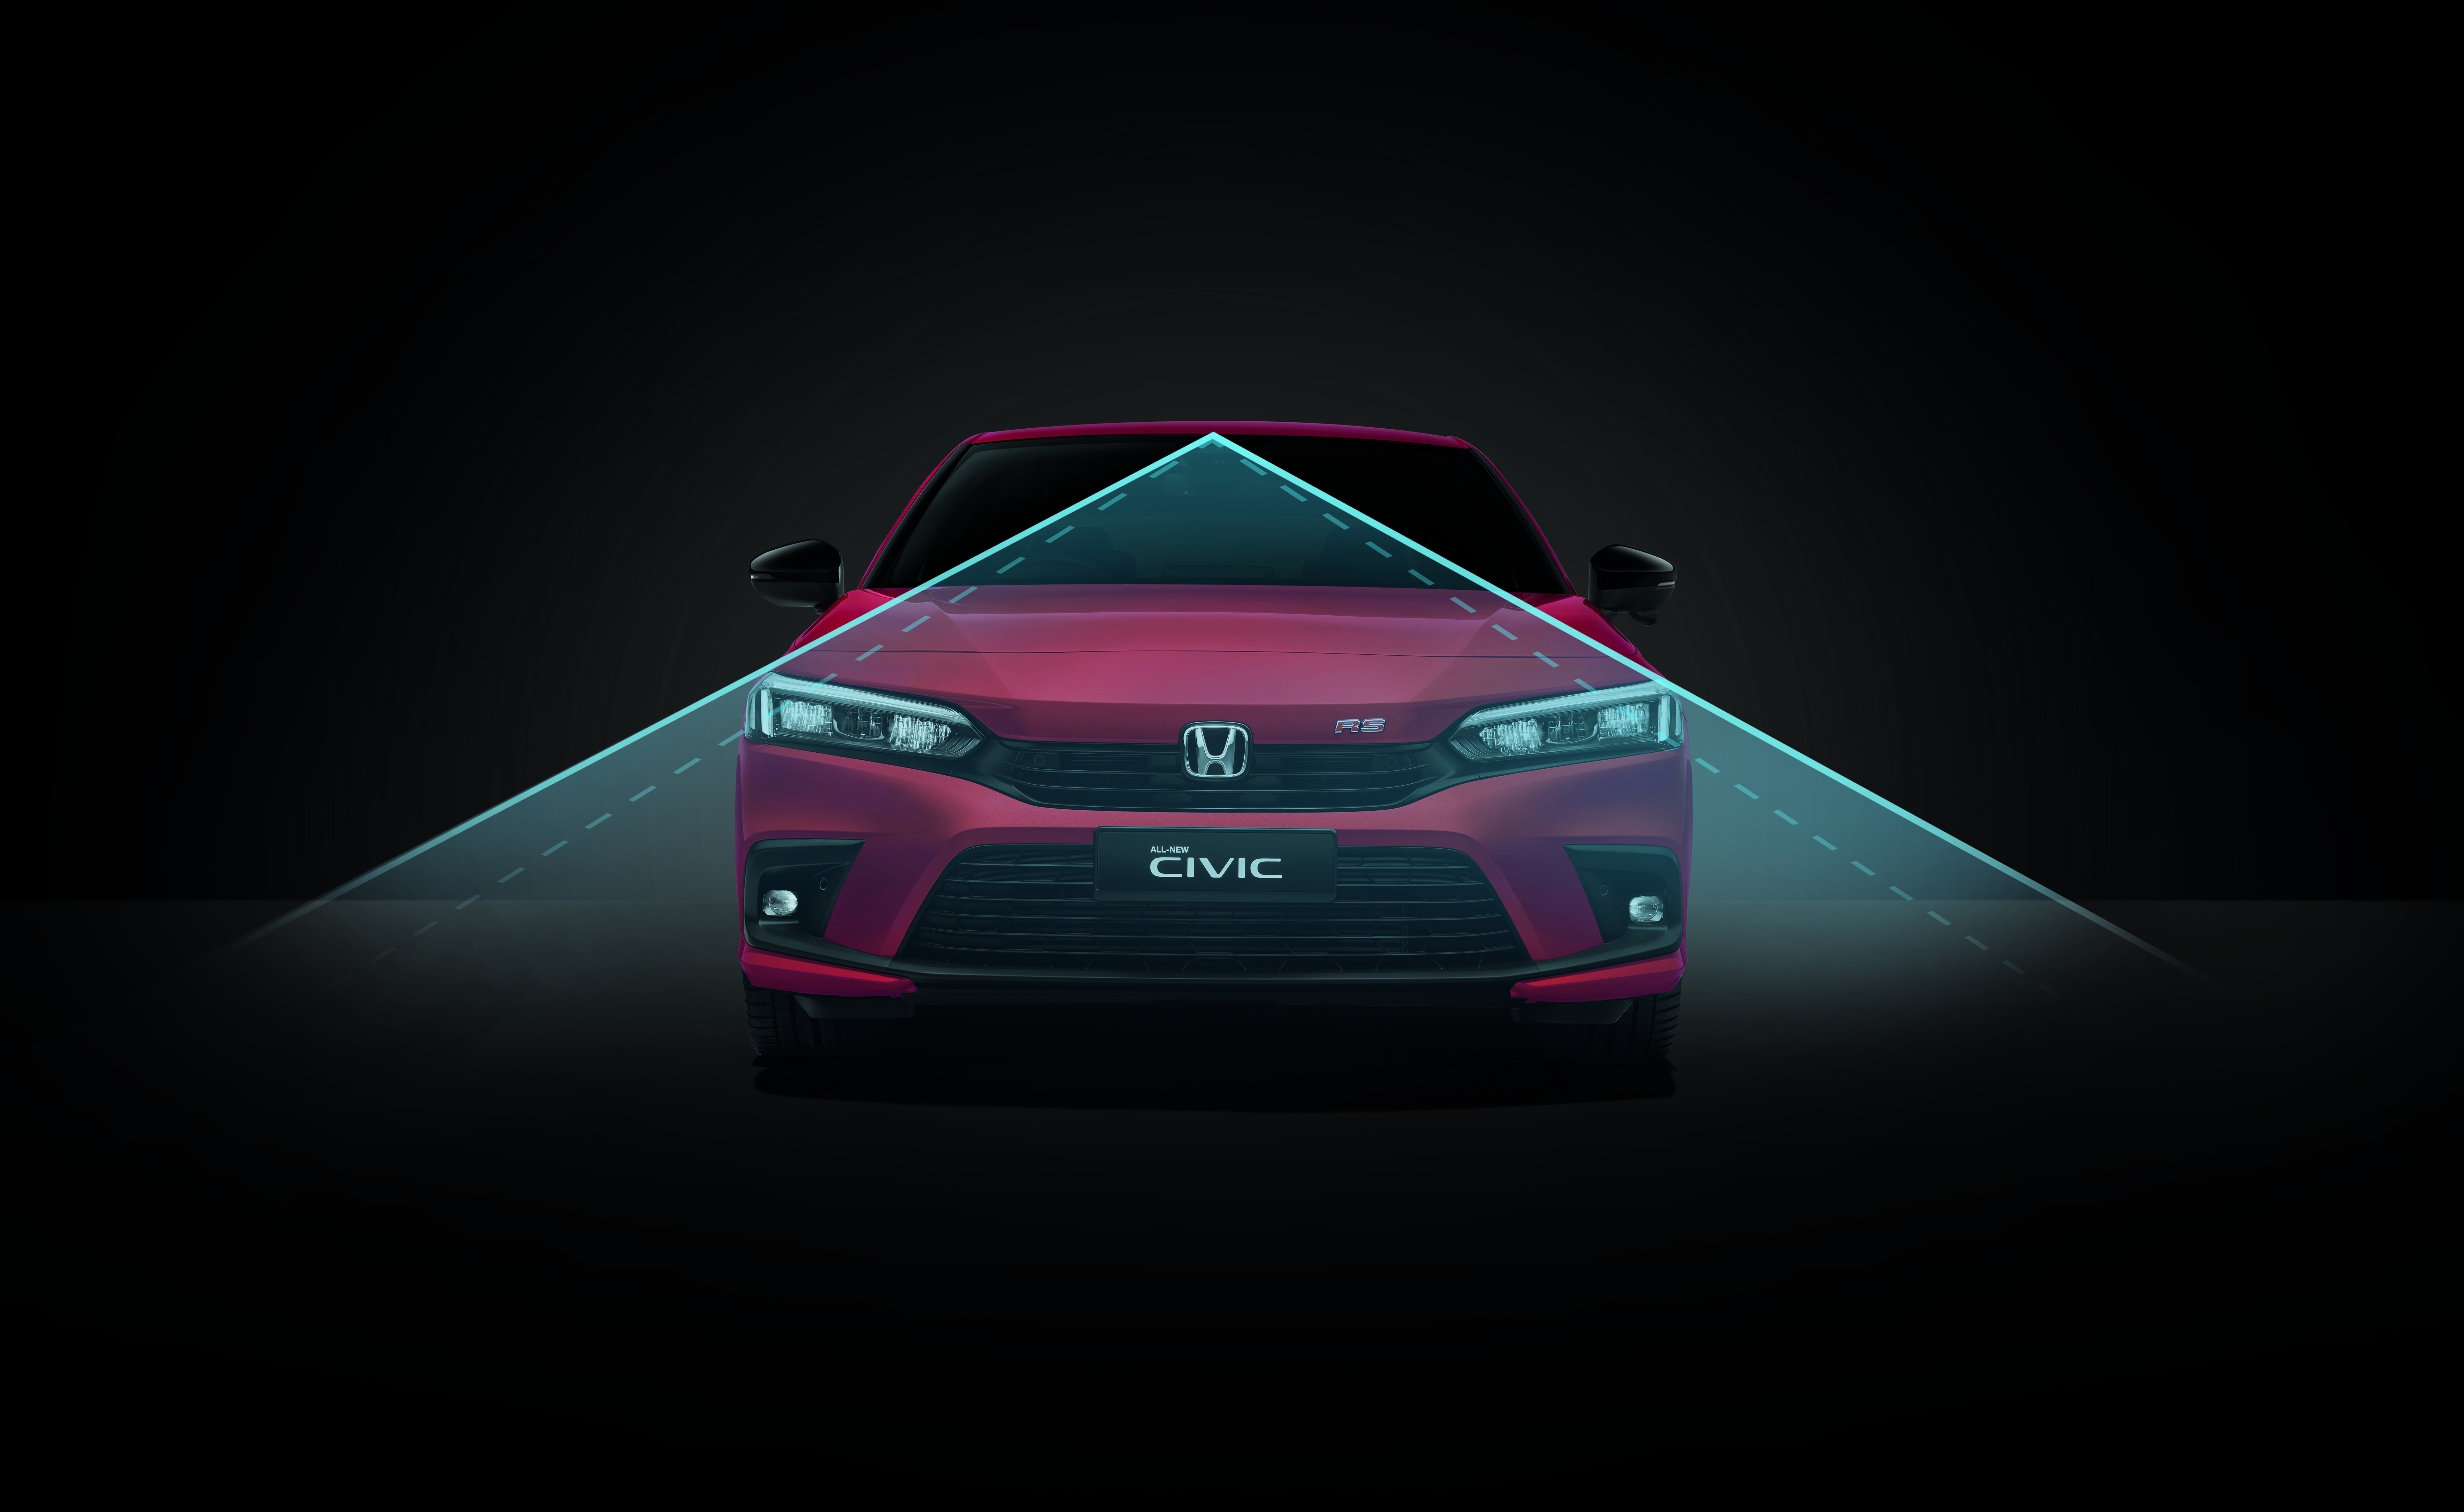 The All-New Civic comes equipped with enhanced Honda SENSING with a new feature - Lead Car Departure Notification System.